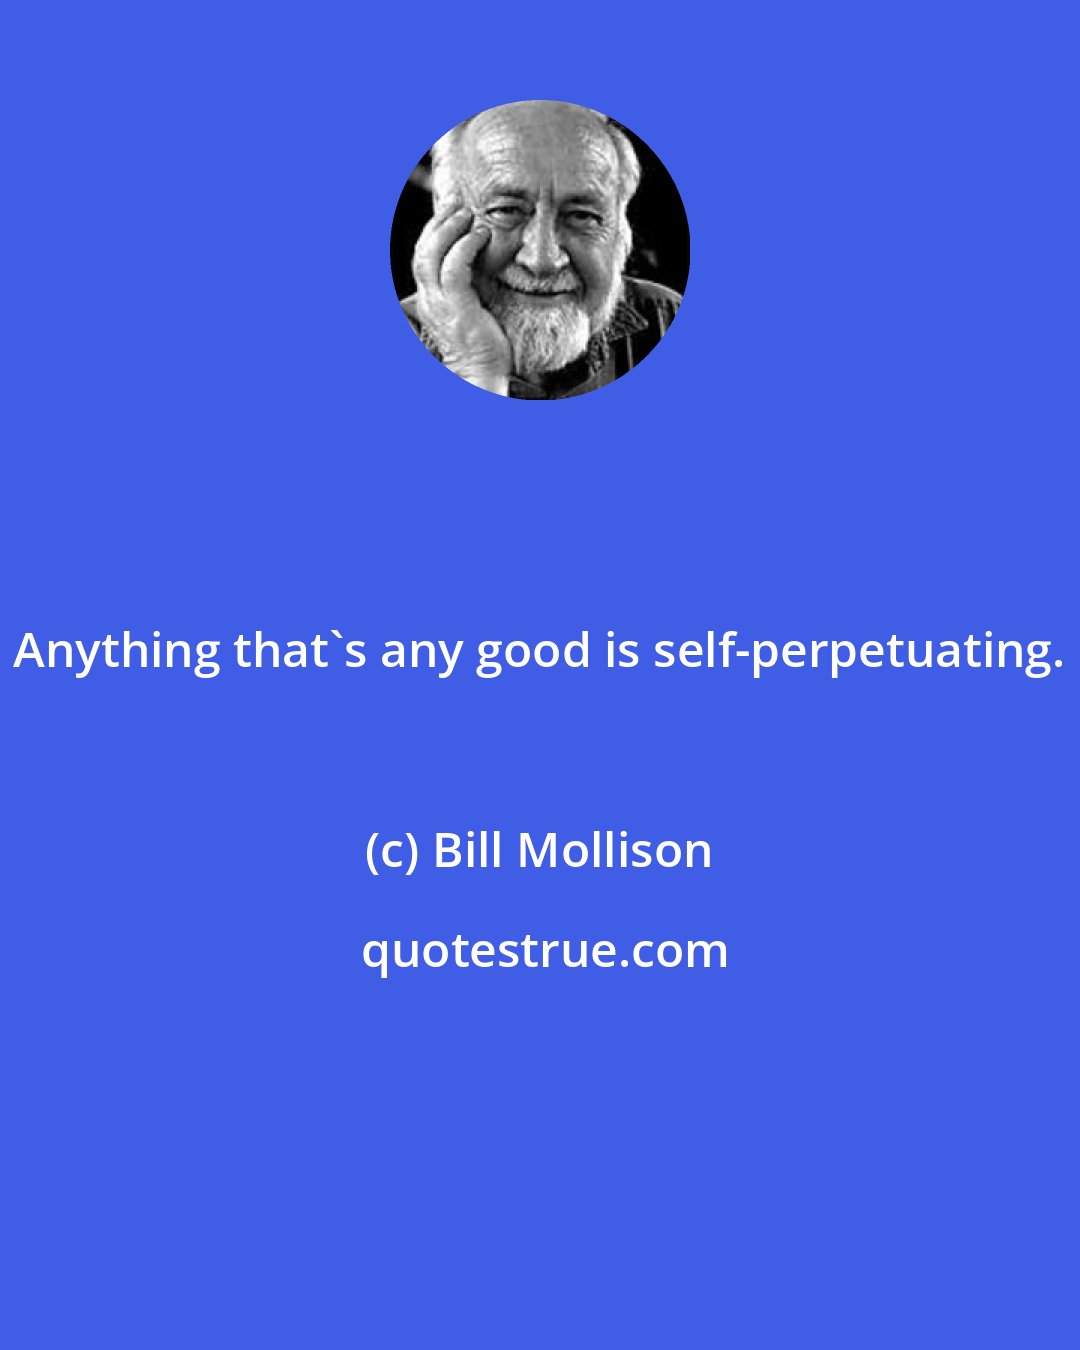 Bill Mollison: Anything that's any good is self-perpetuating.